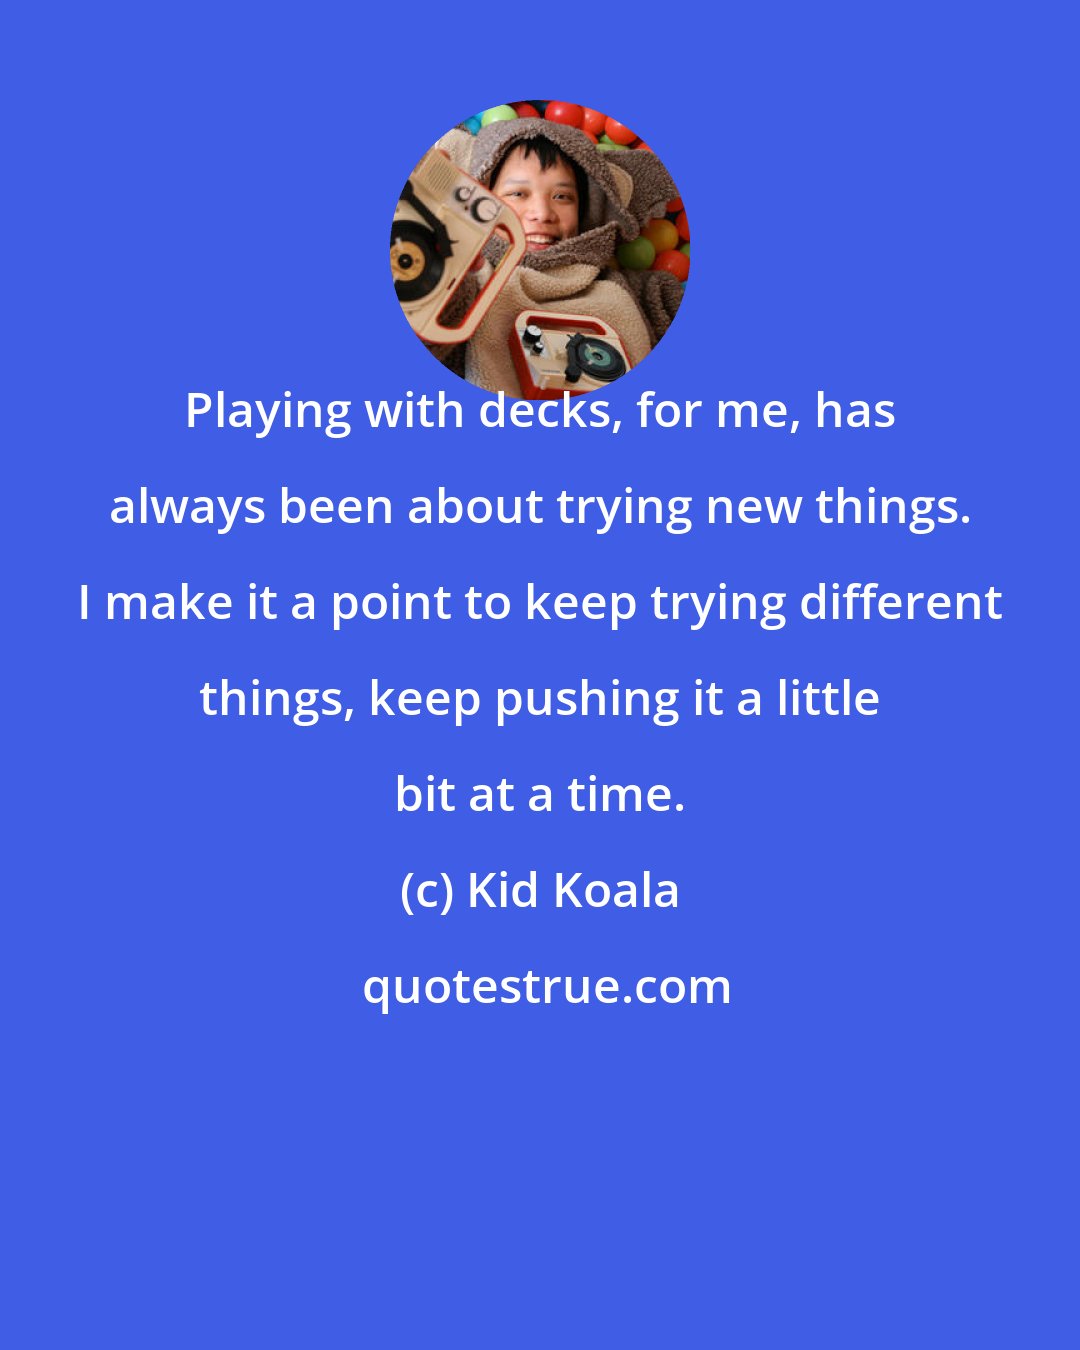 Kid Koala: Playing with decks, for me, has always been about trying new things. I make it a point to keep trying different things, keep pushing it a little bit at a time.